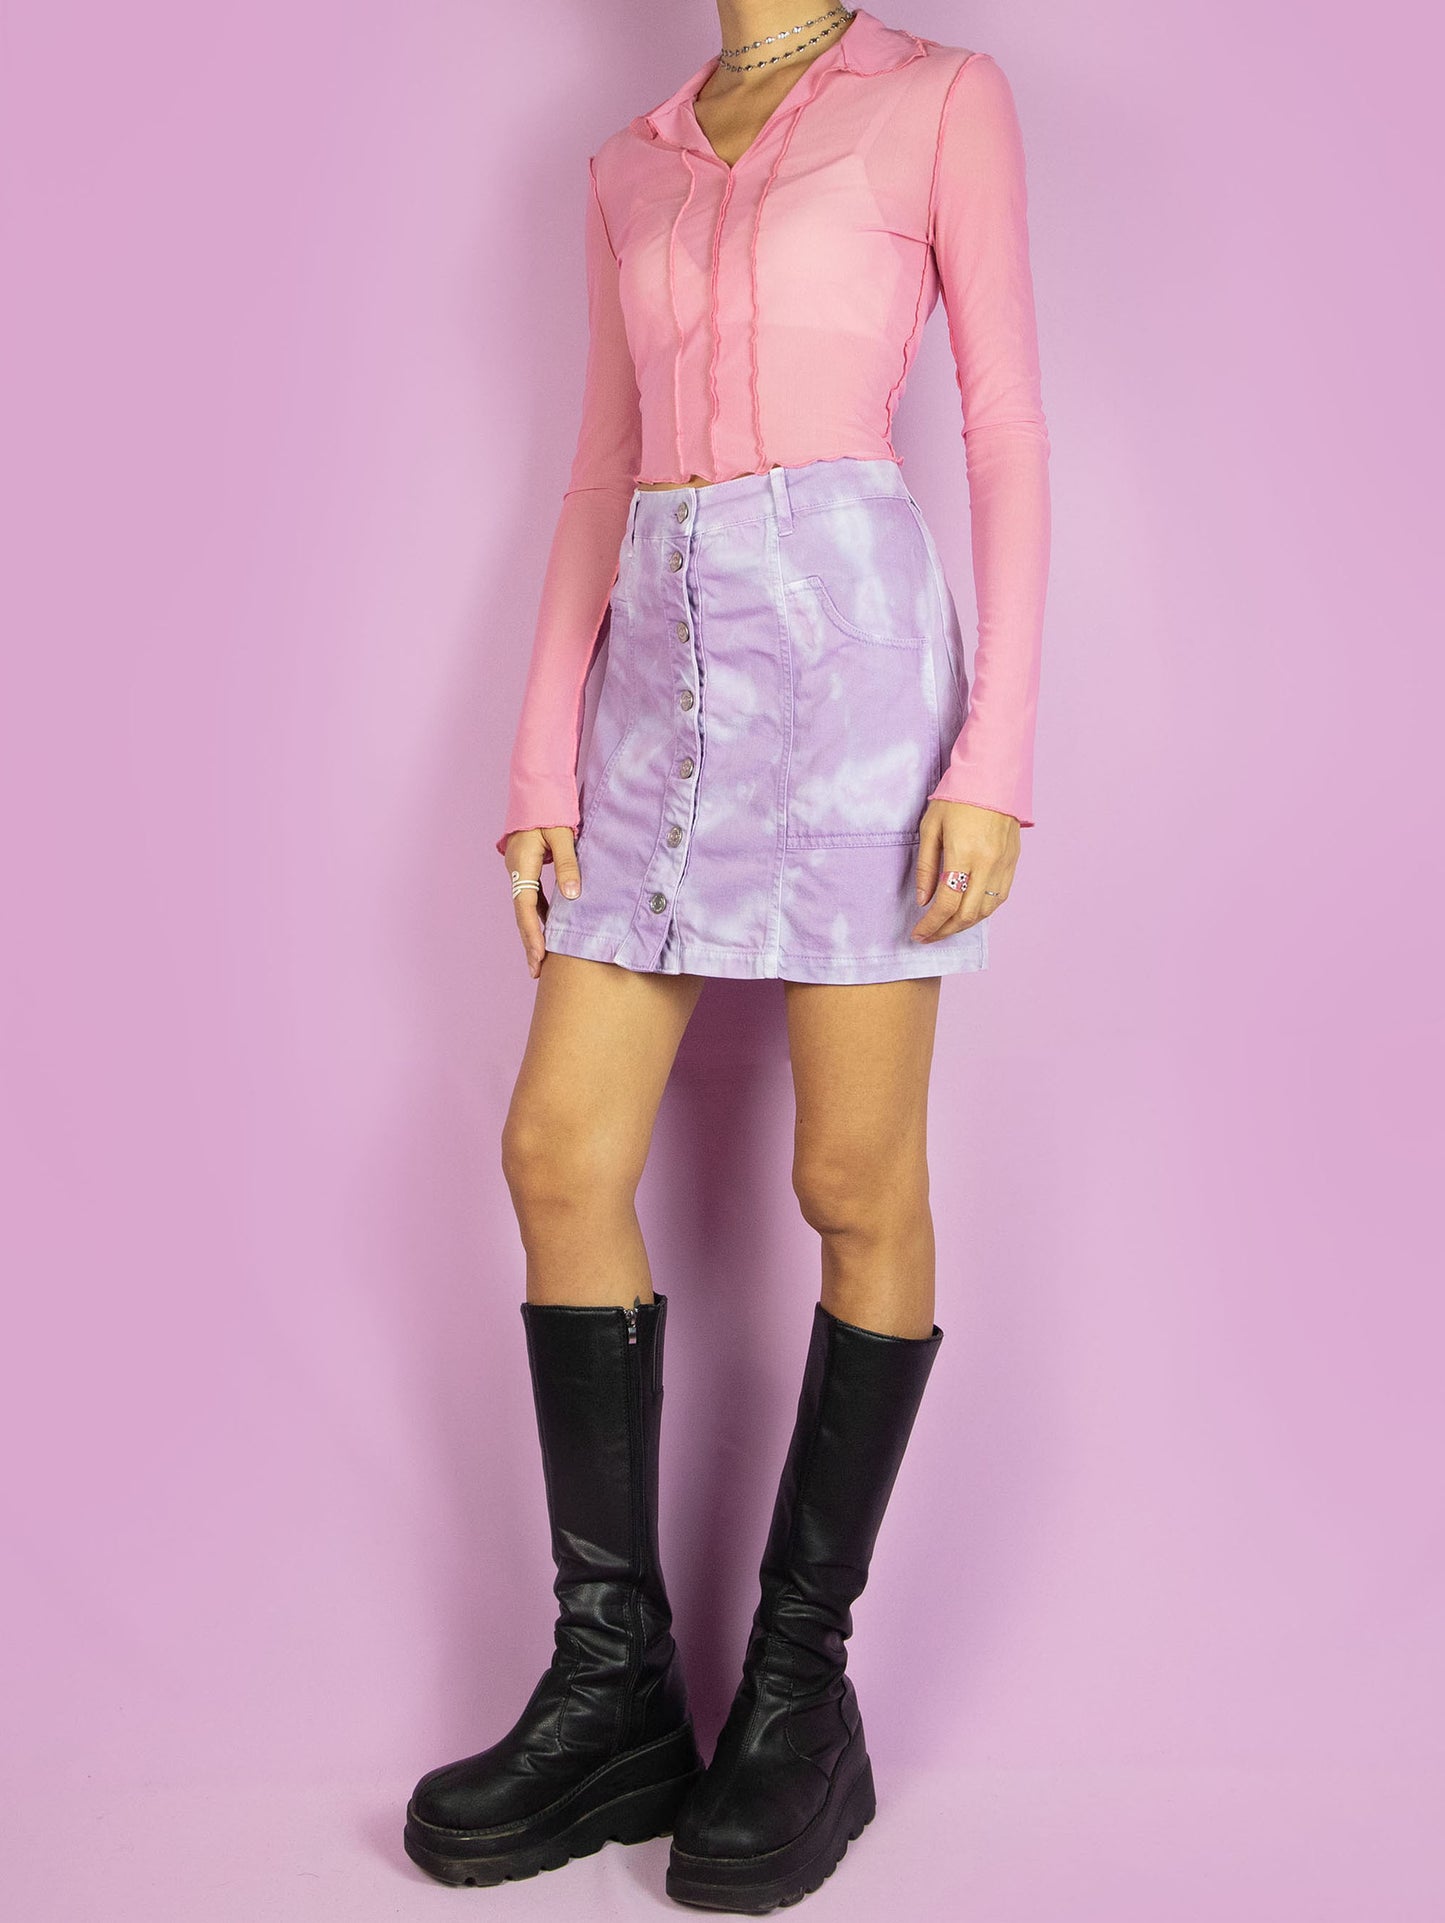 The Y2K Tie Dye Denim Mini Skirt is a vintage lilac and blue skirt with pockets and buttons. Cyber harajuku festival 2000s pastel purple bleached mini skirt.